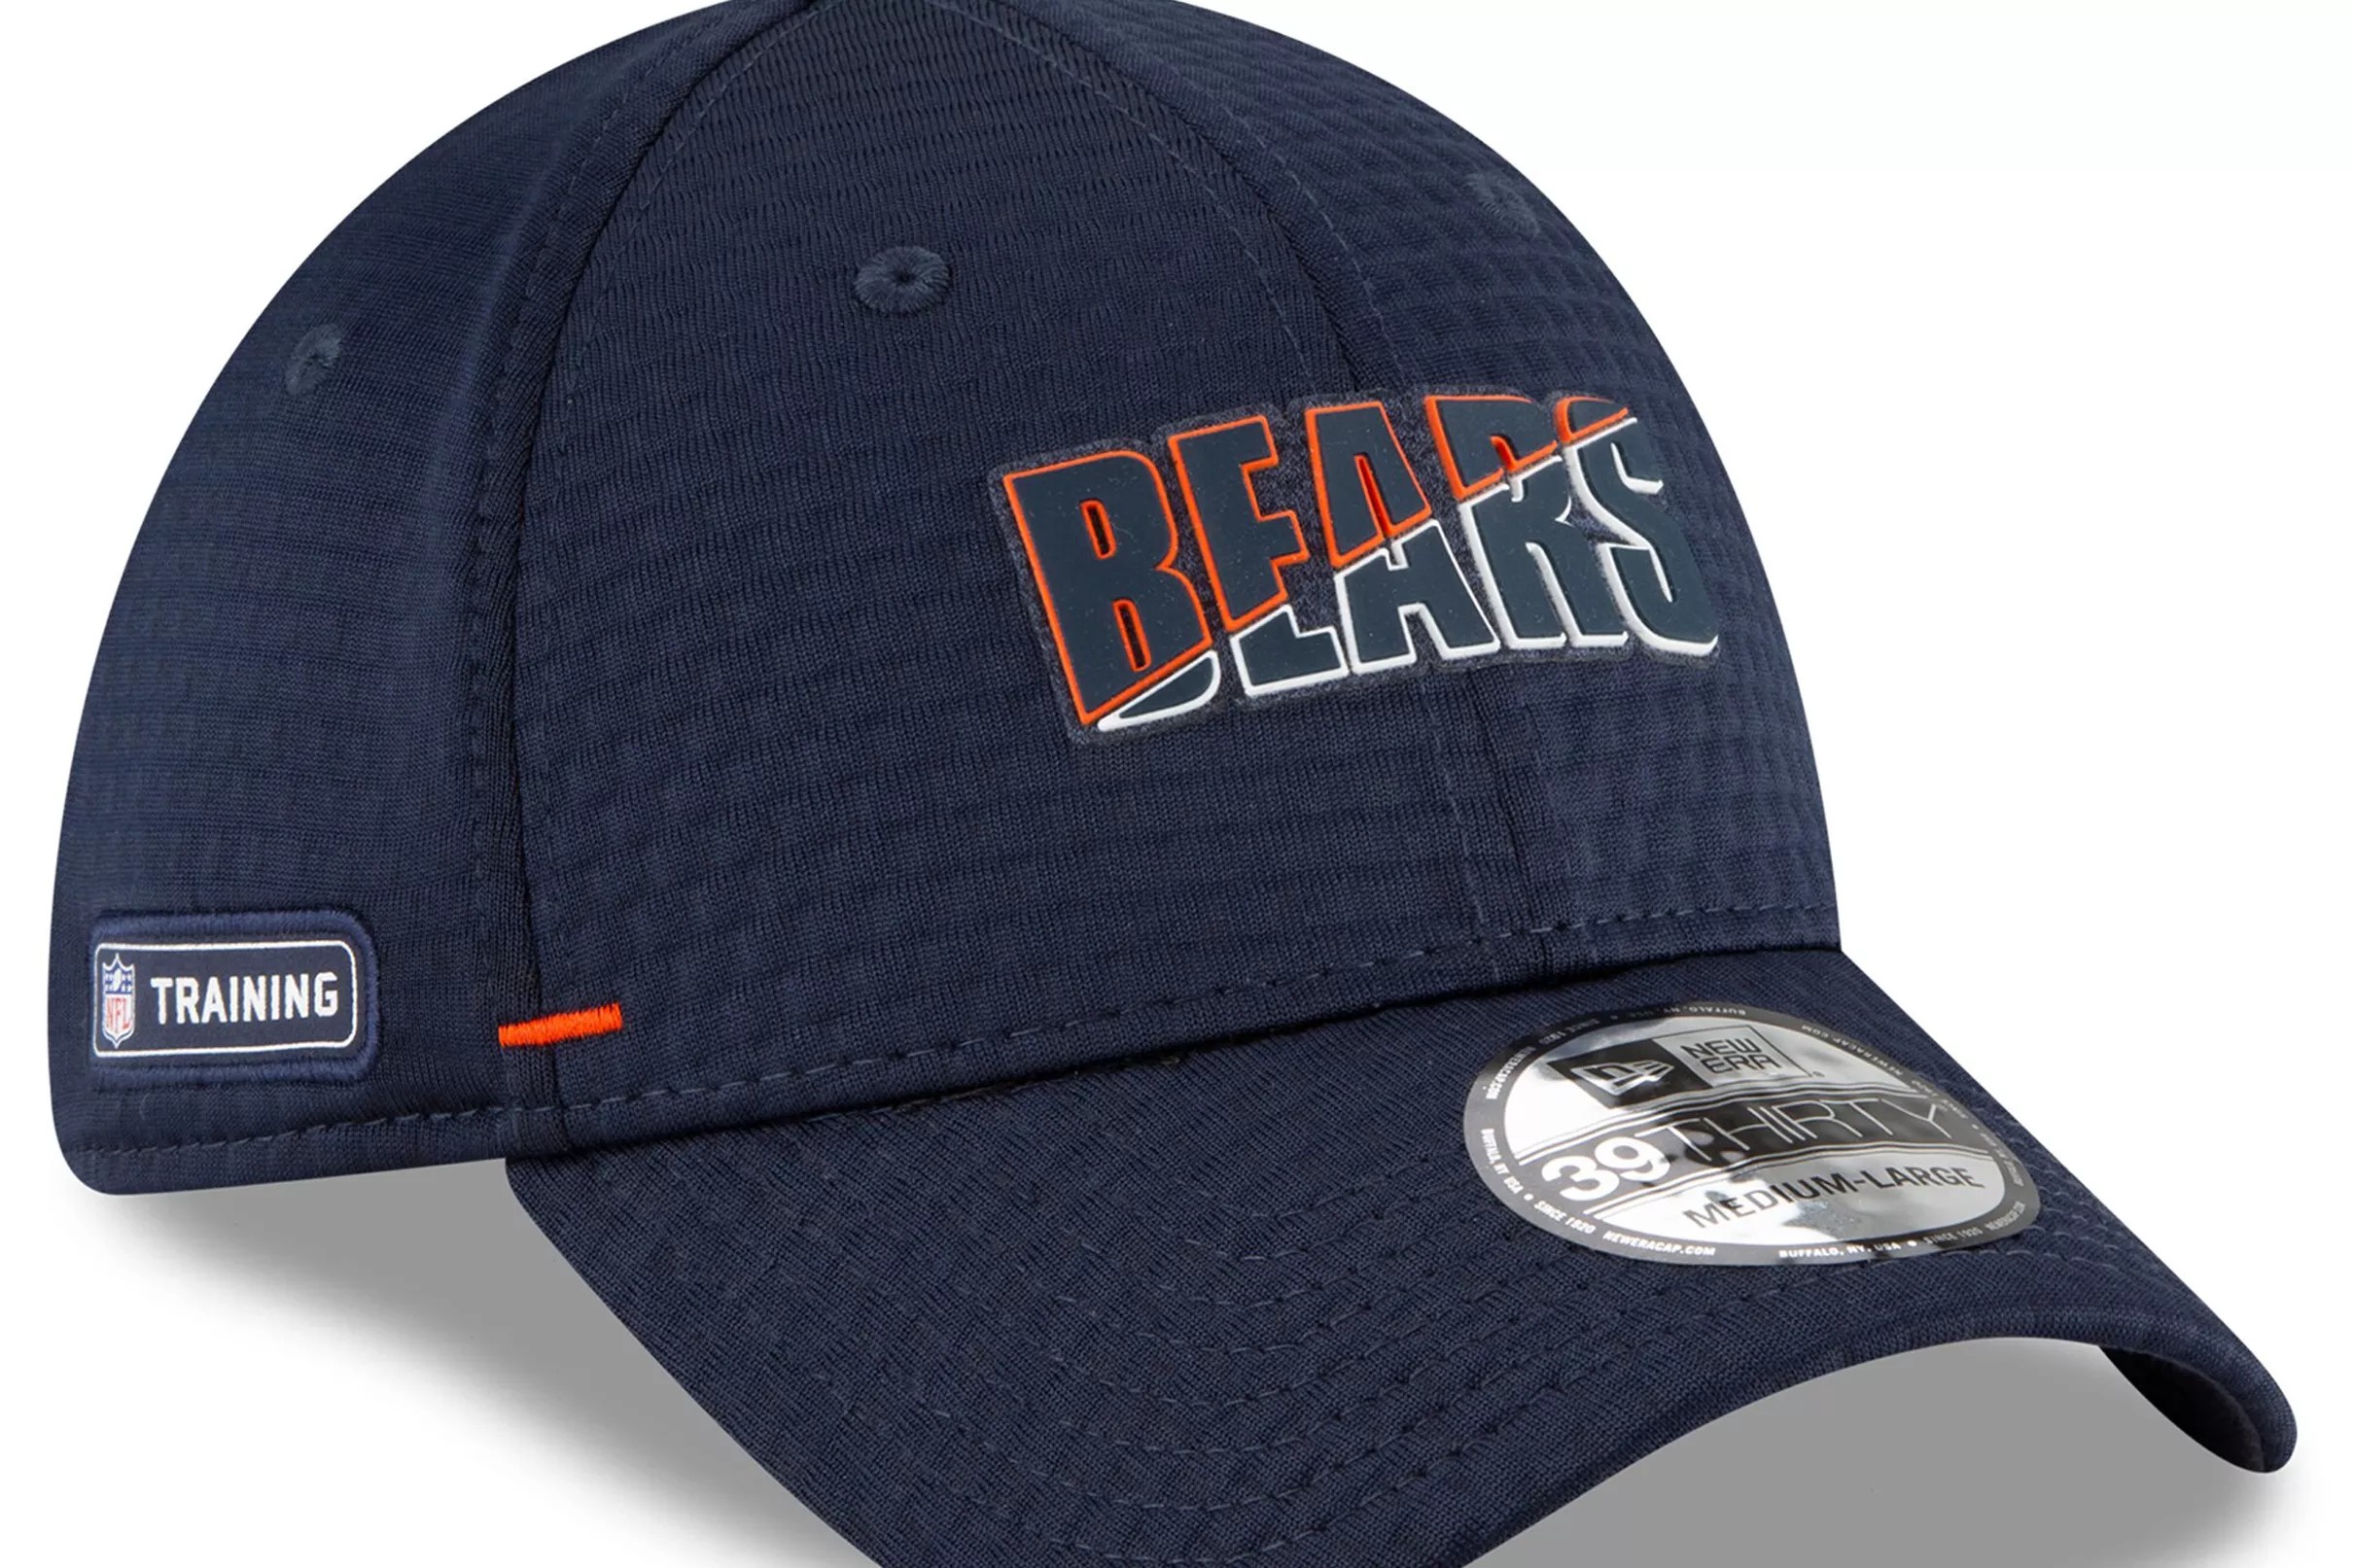 The Bears New Era Summer Sideline hat collection has dropped!